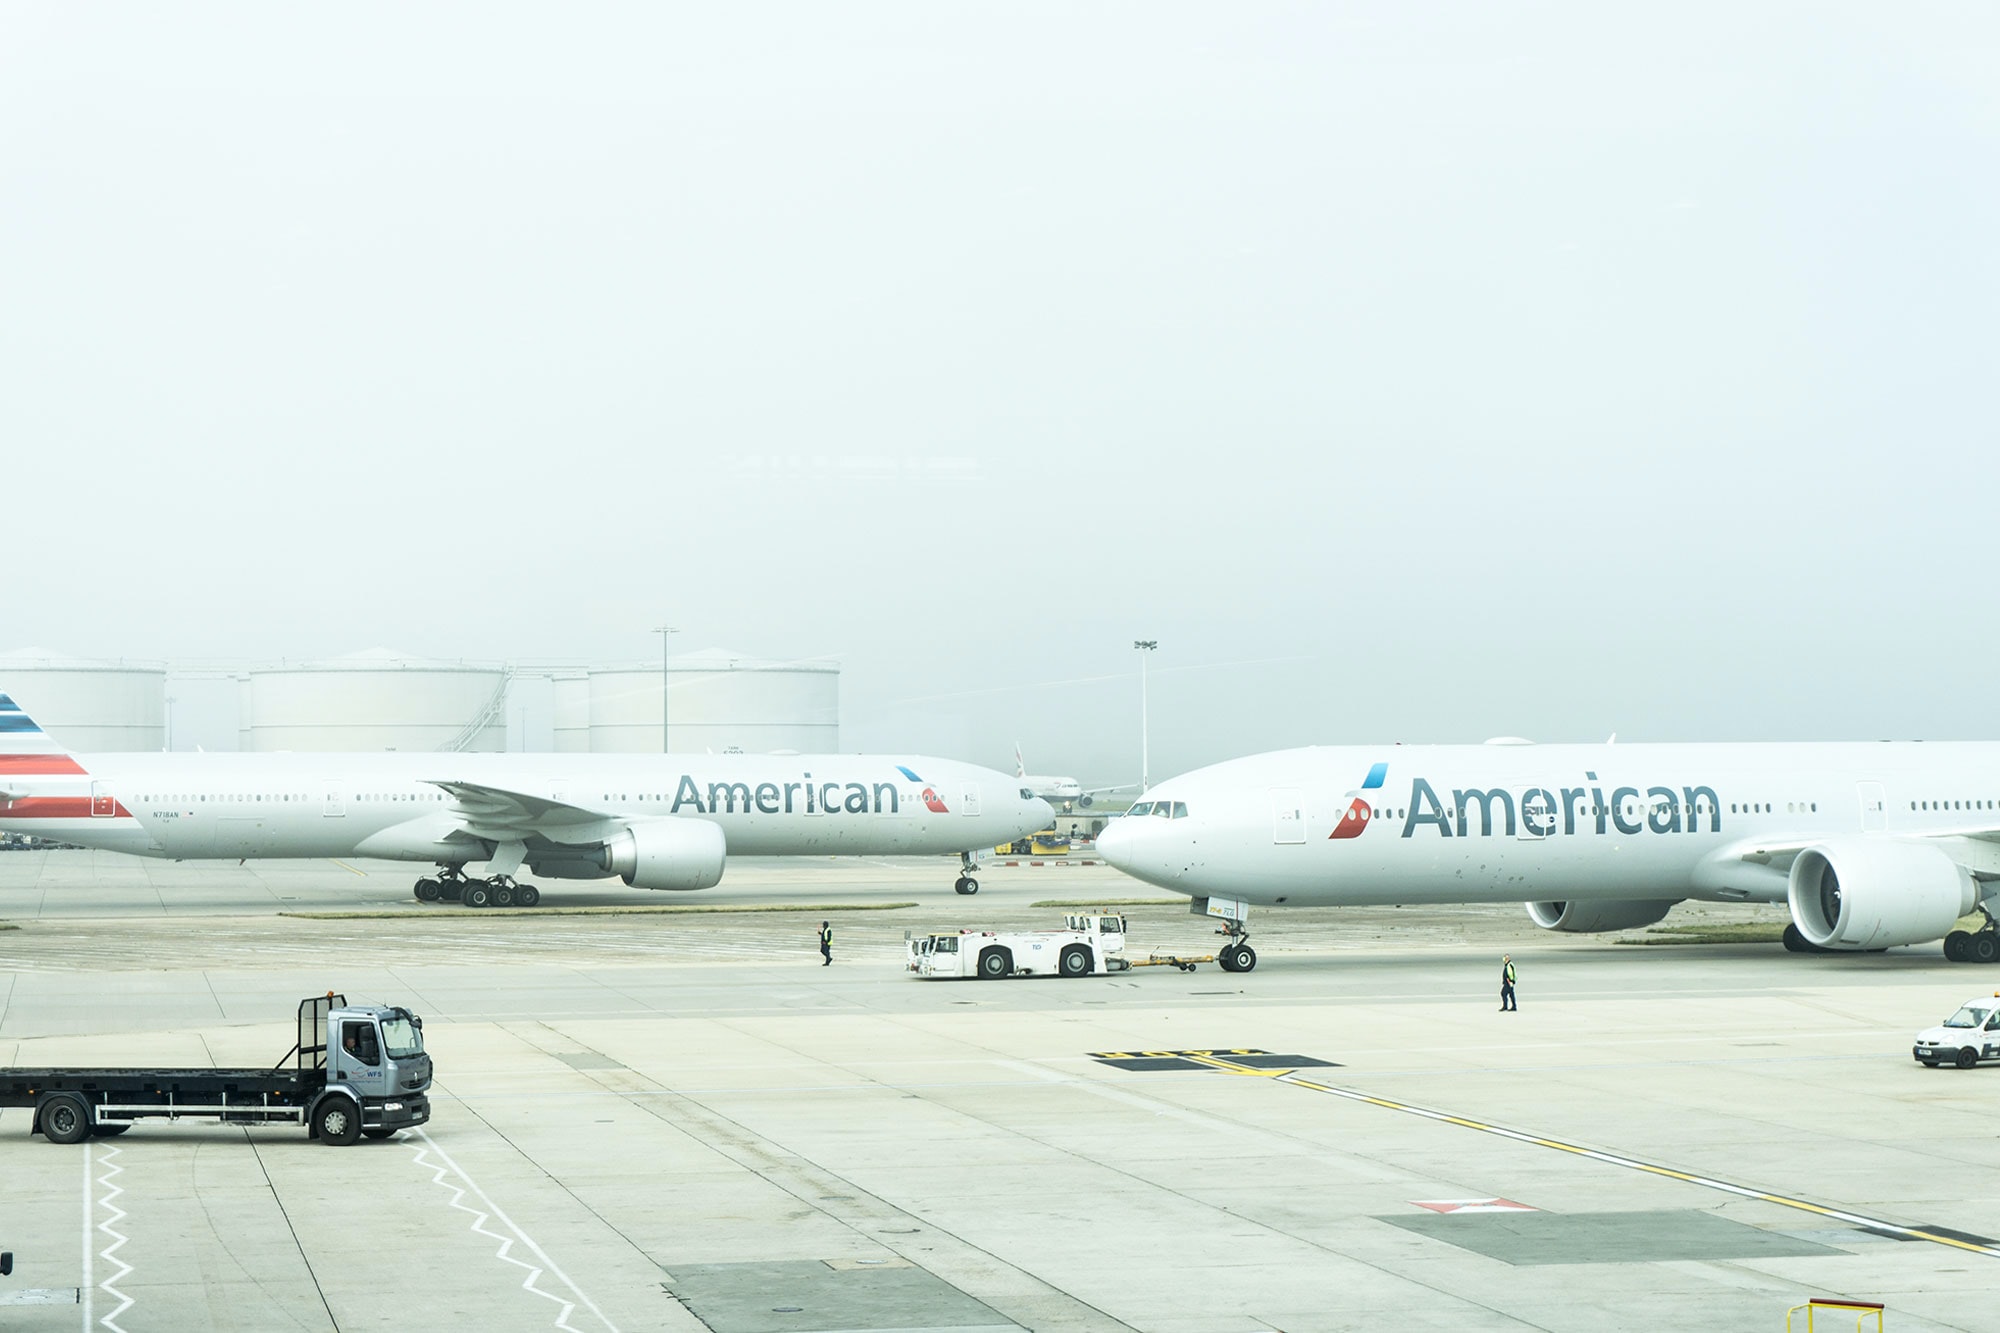 Two American Airlines planes at London Heathrow Airport; image by Damian Hutter, via Unsplash.com.